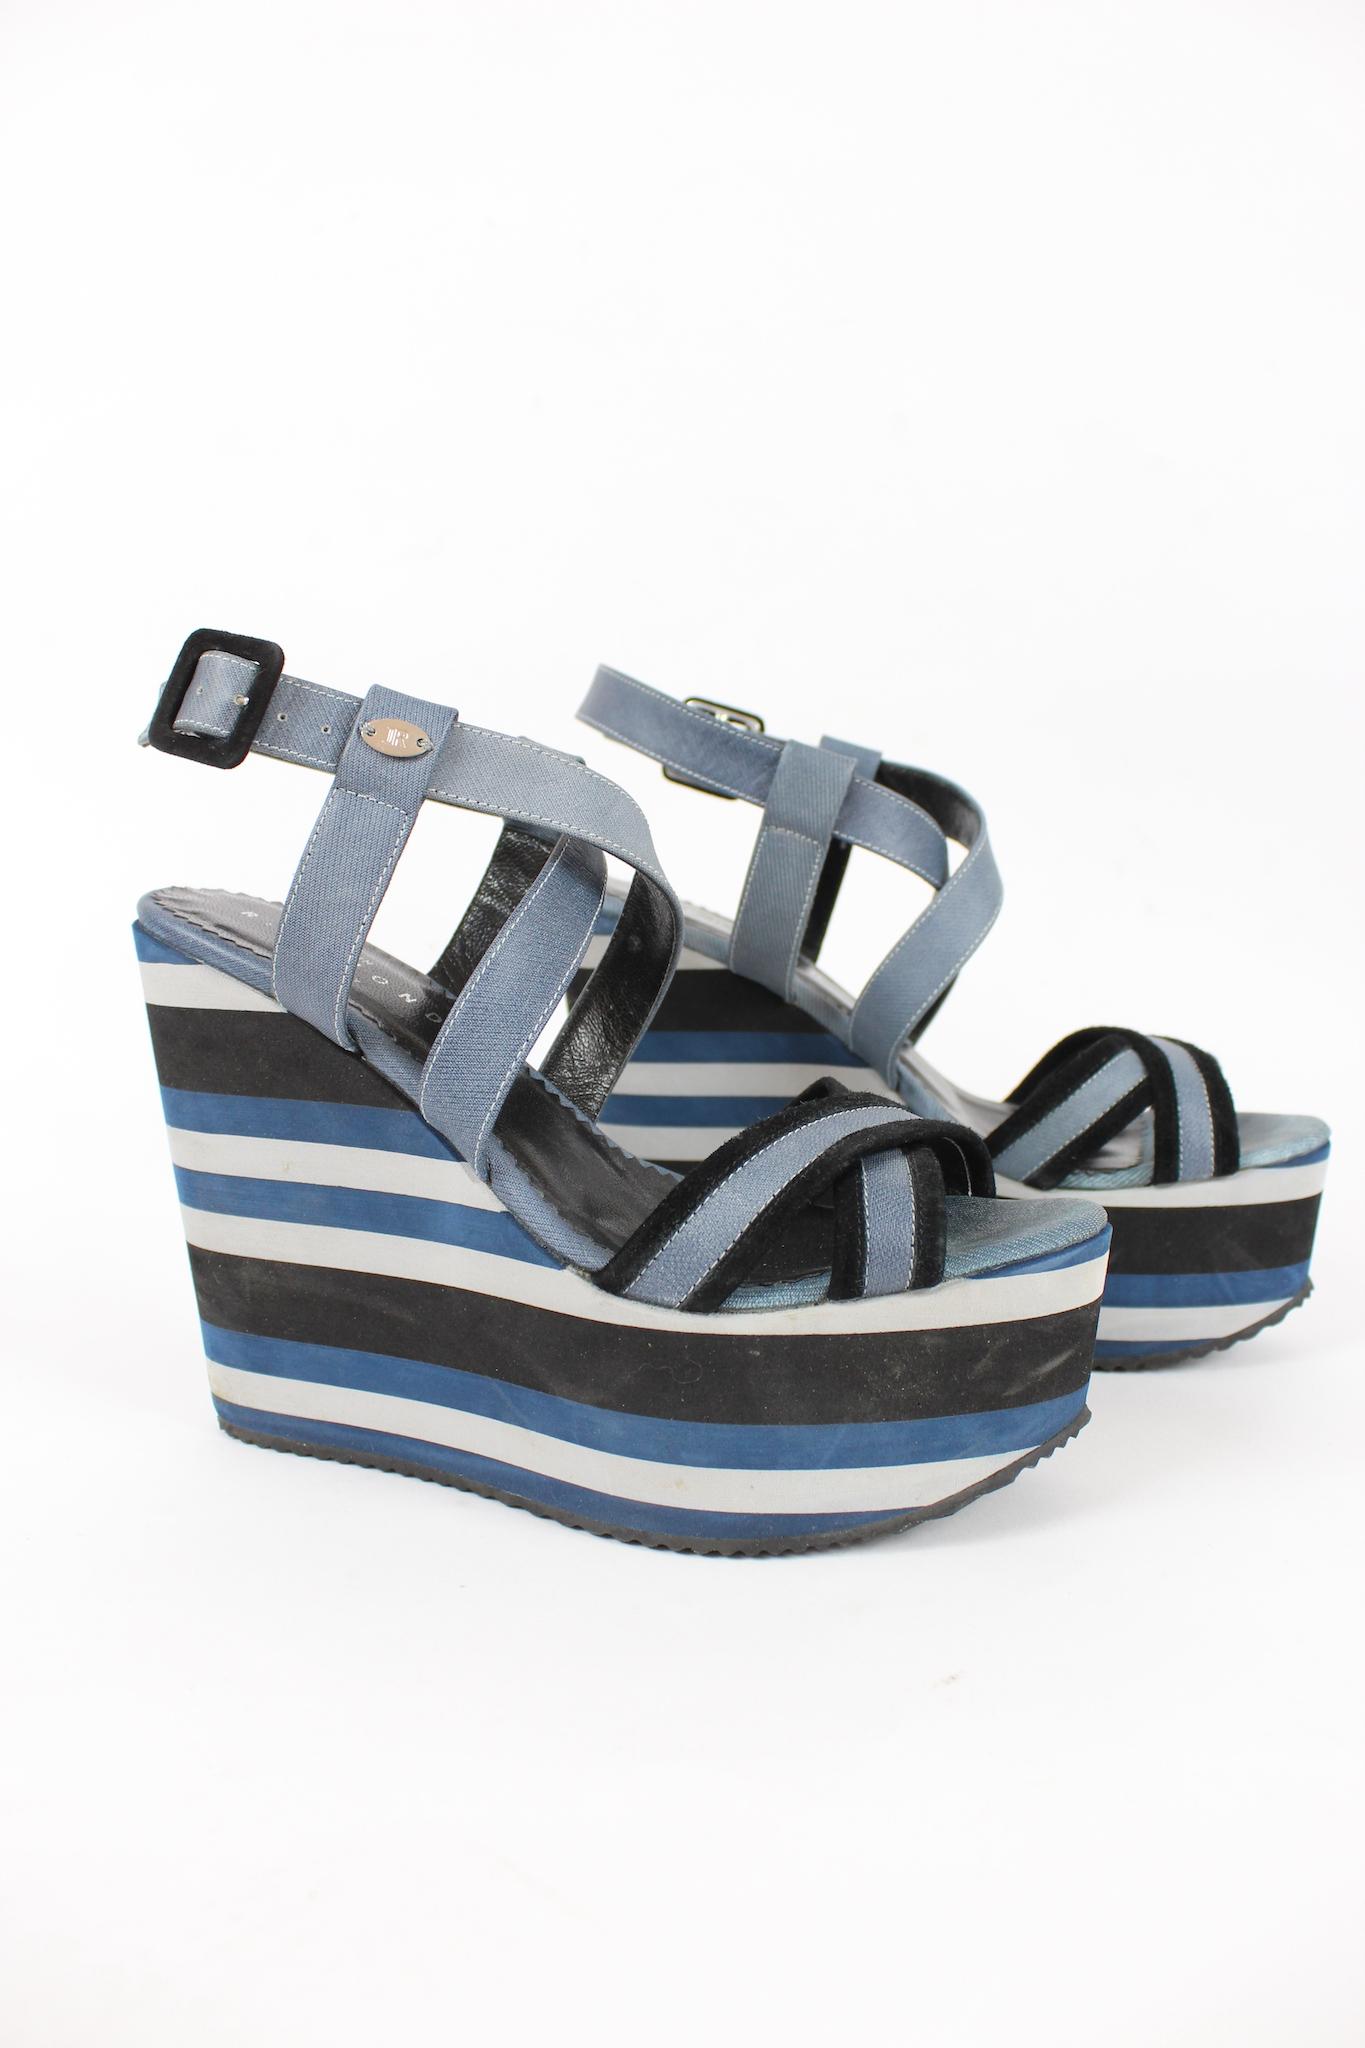 Richmond 2000s wedge shoes. Blue and black color, intertwined with adjustable ankle lacing. Striped rubber wedge. Made in Italy.

Size: 39 It 8.5 Us 6 Uk

Wedge height: 6 cm
Heel height: 12 cm
Sole length: 25 cm